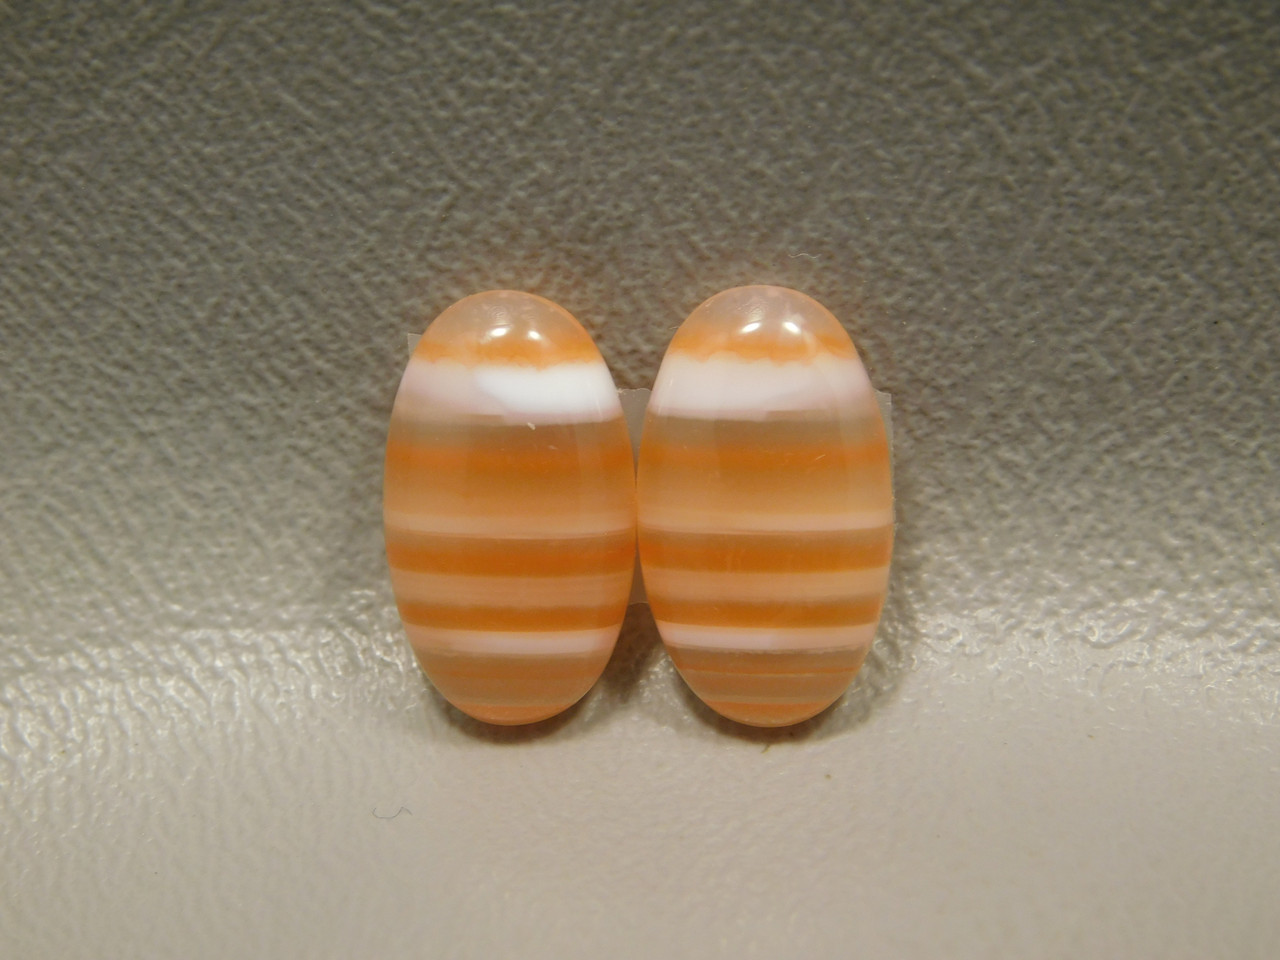 Stone Cabochons Orange White Striped Carnelian Agate Matched Pair #1